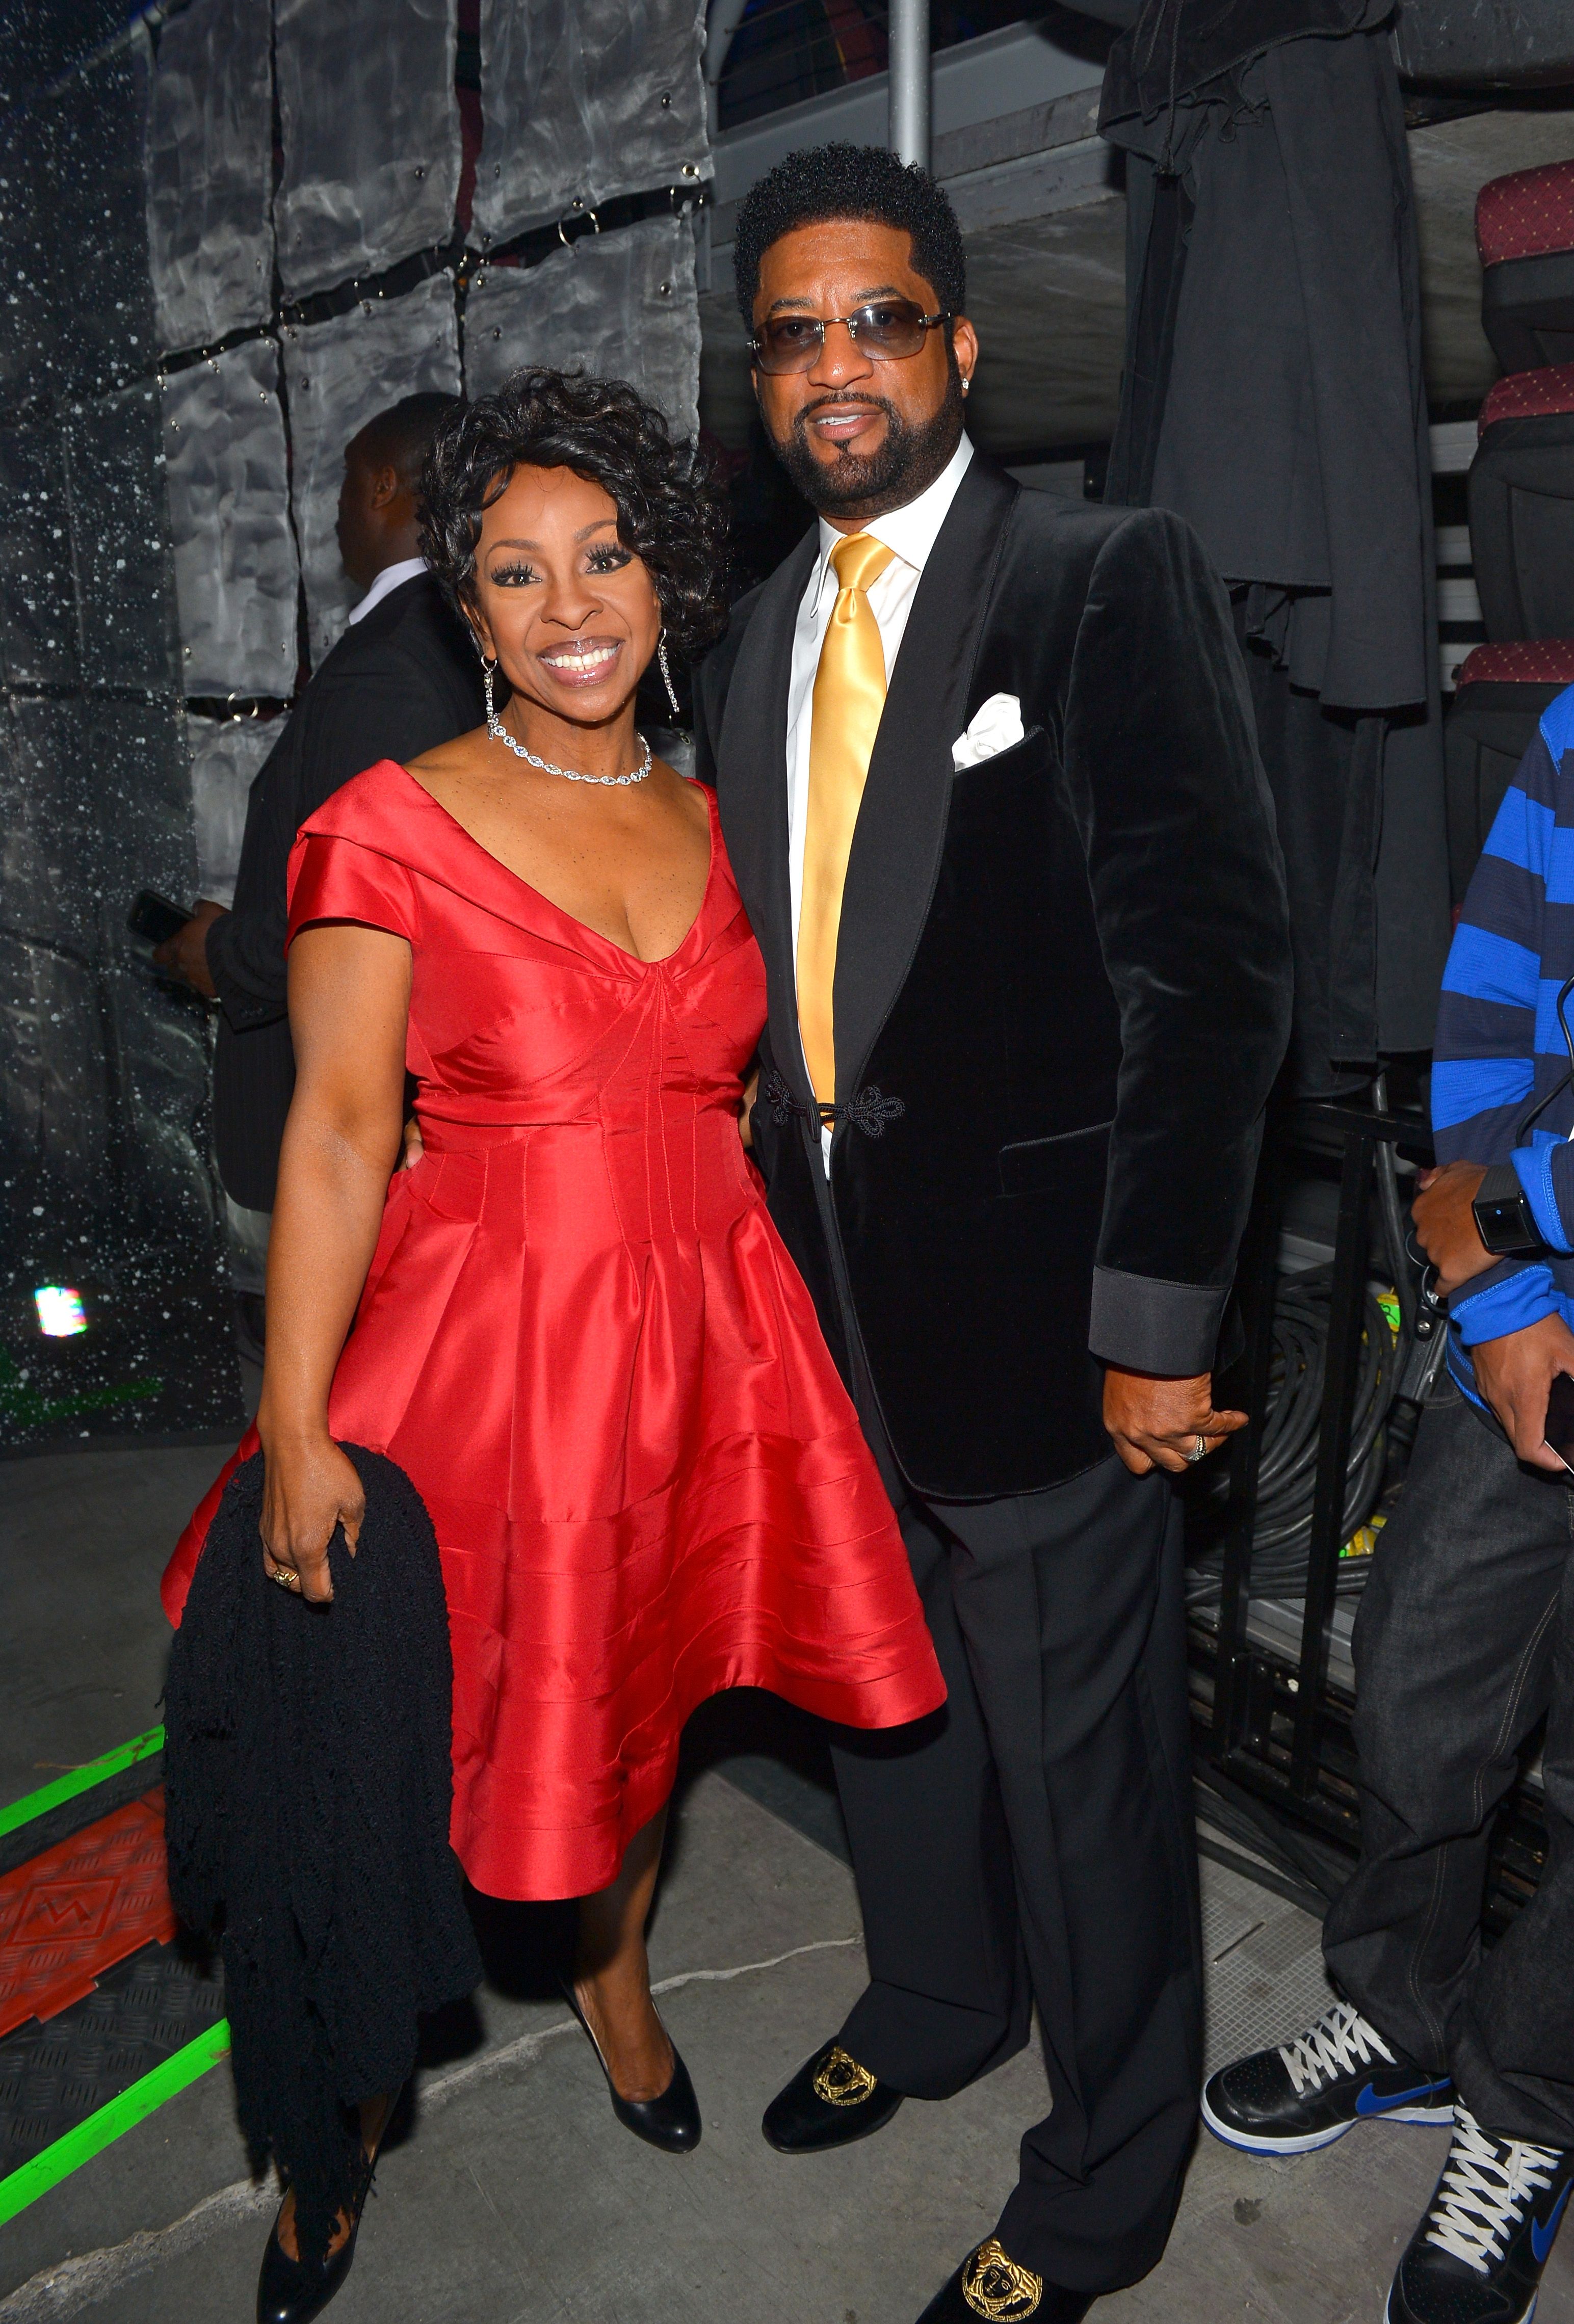 Gladys Knight and William McDowell at the Soul Train Awards in Las Vegas, Nevada in 2013 | Source: Getty Images